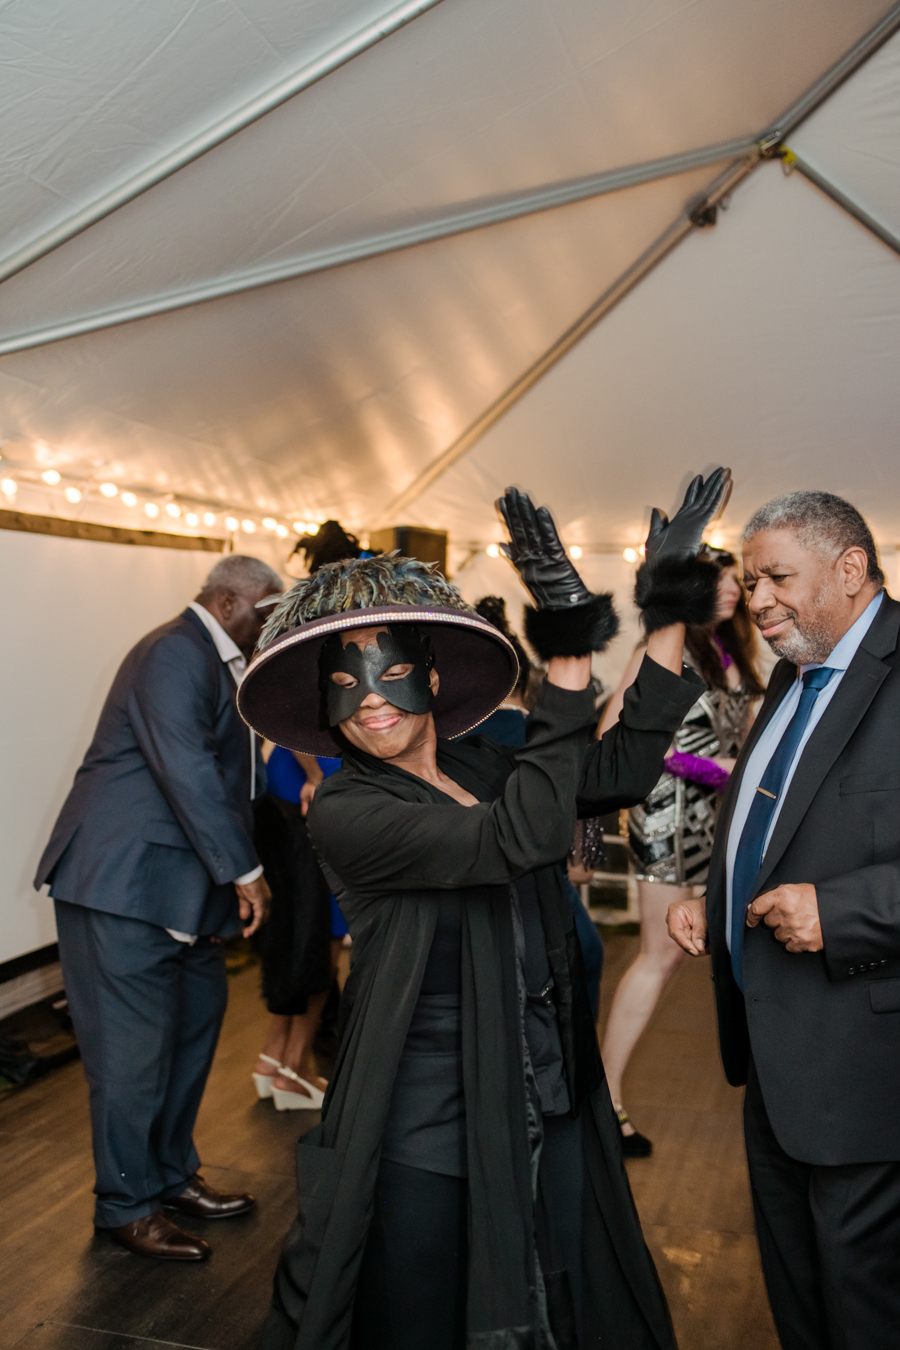 guests dance at SFNC 60th gala wearing masquerade attire